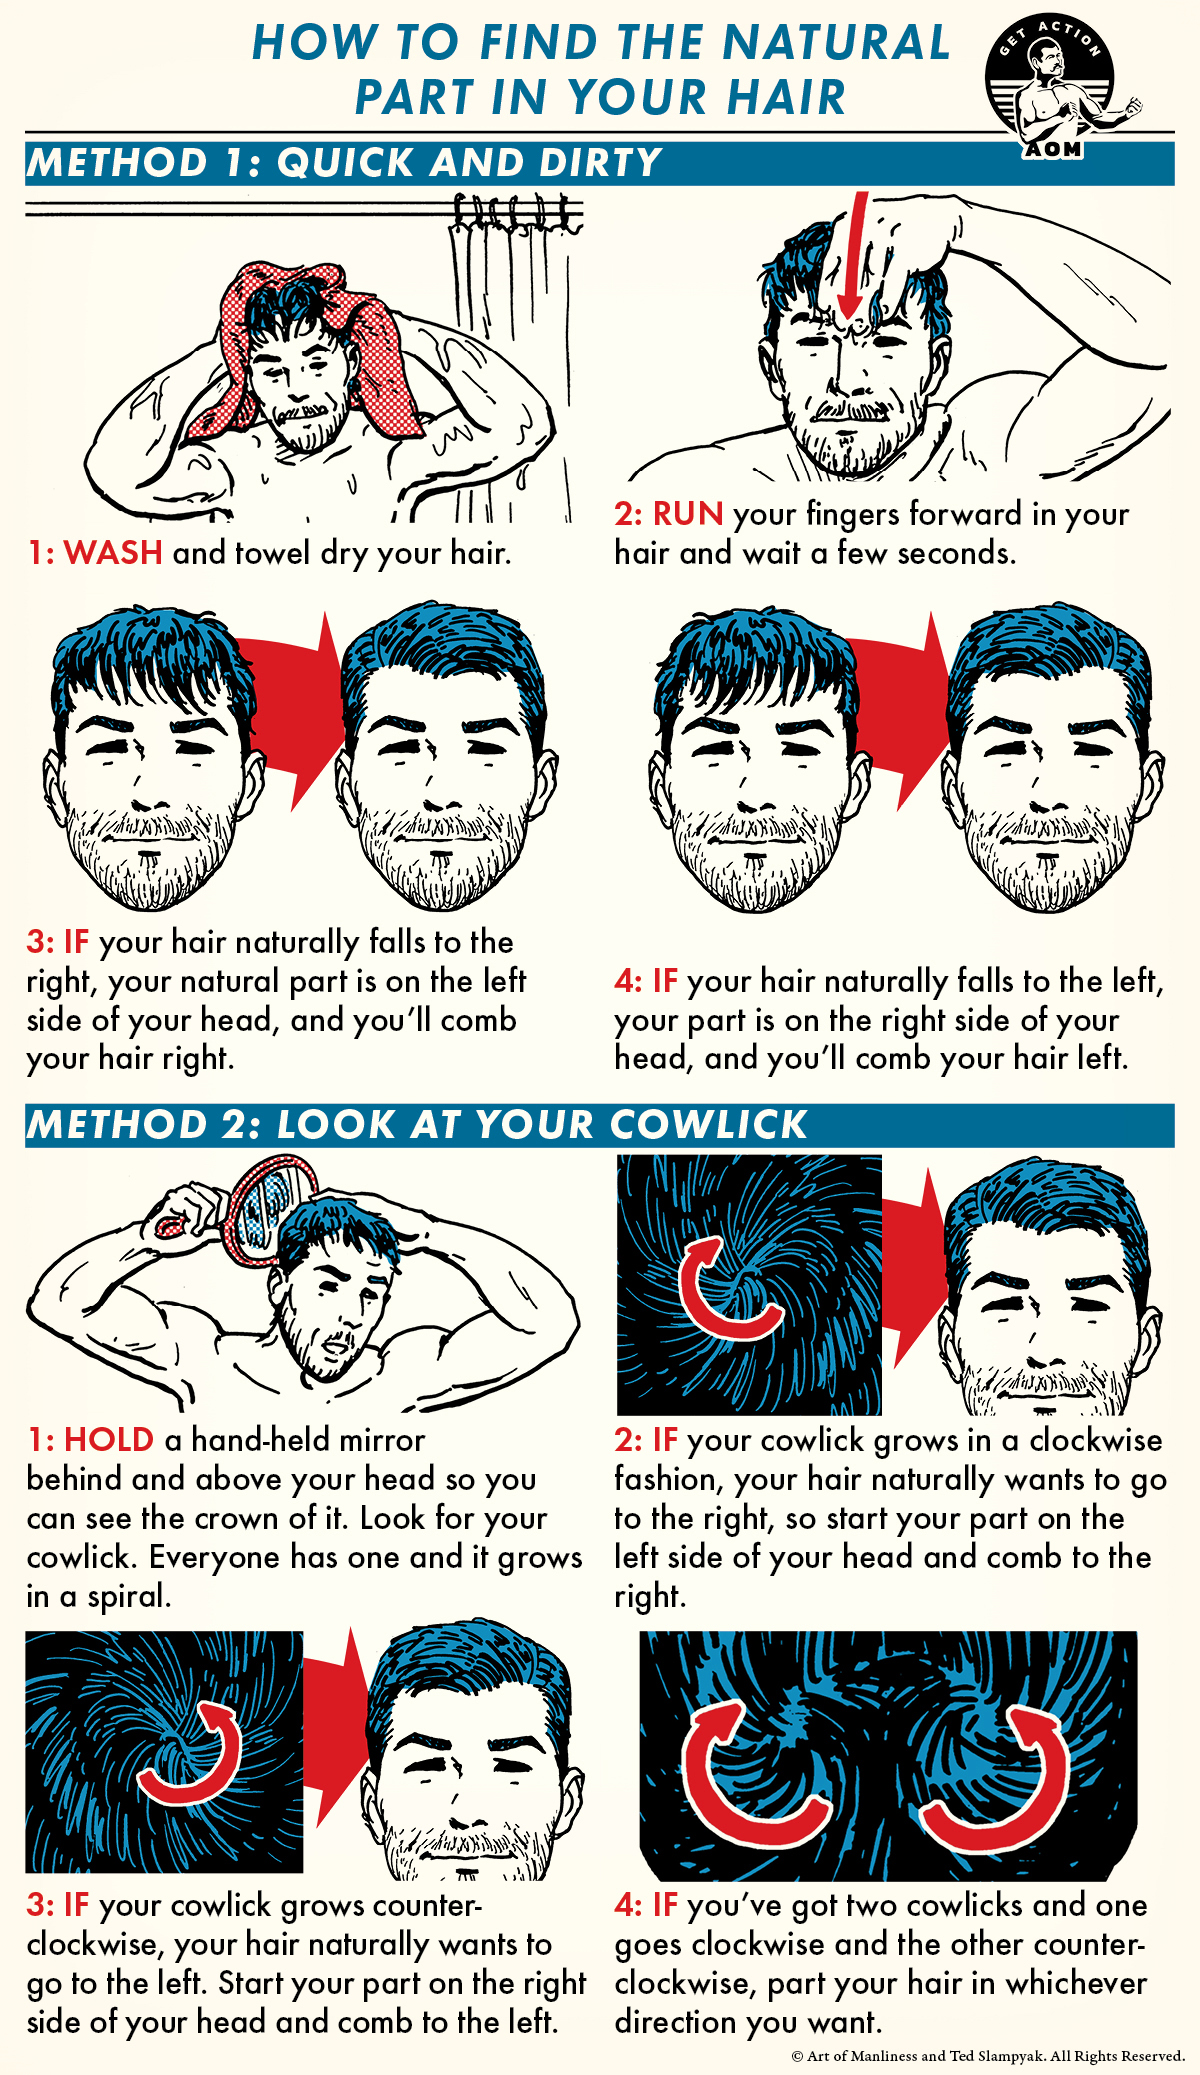 How to Find the Natural Part In Your Hair | The Art of Manliness